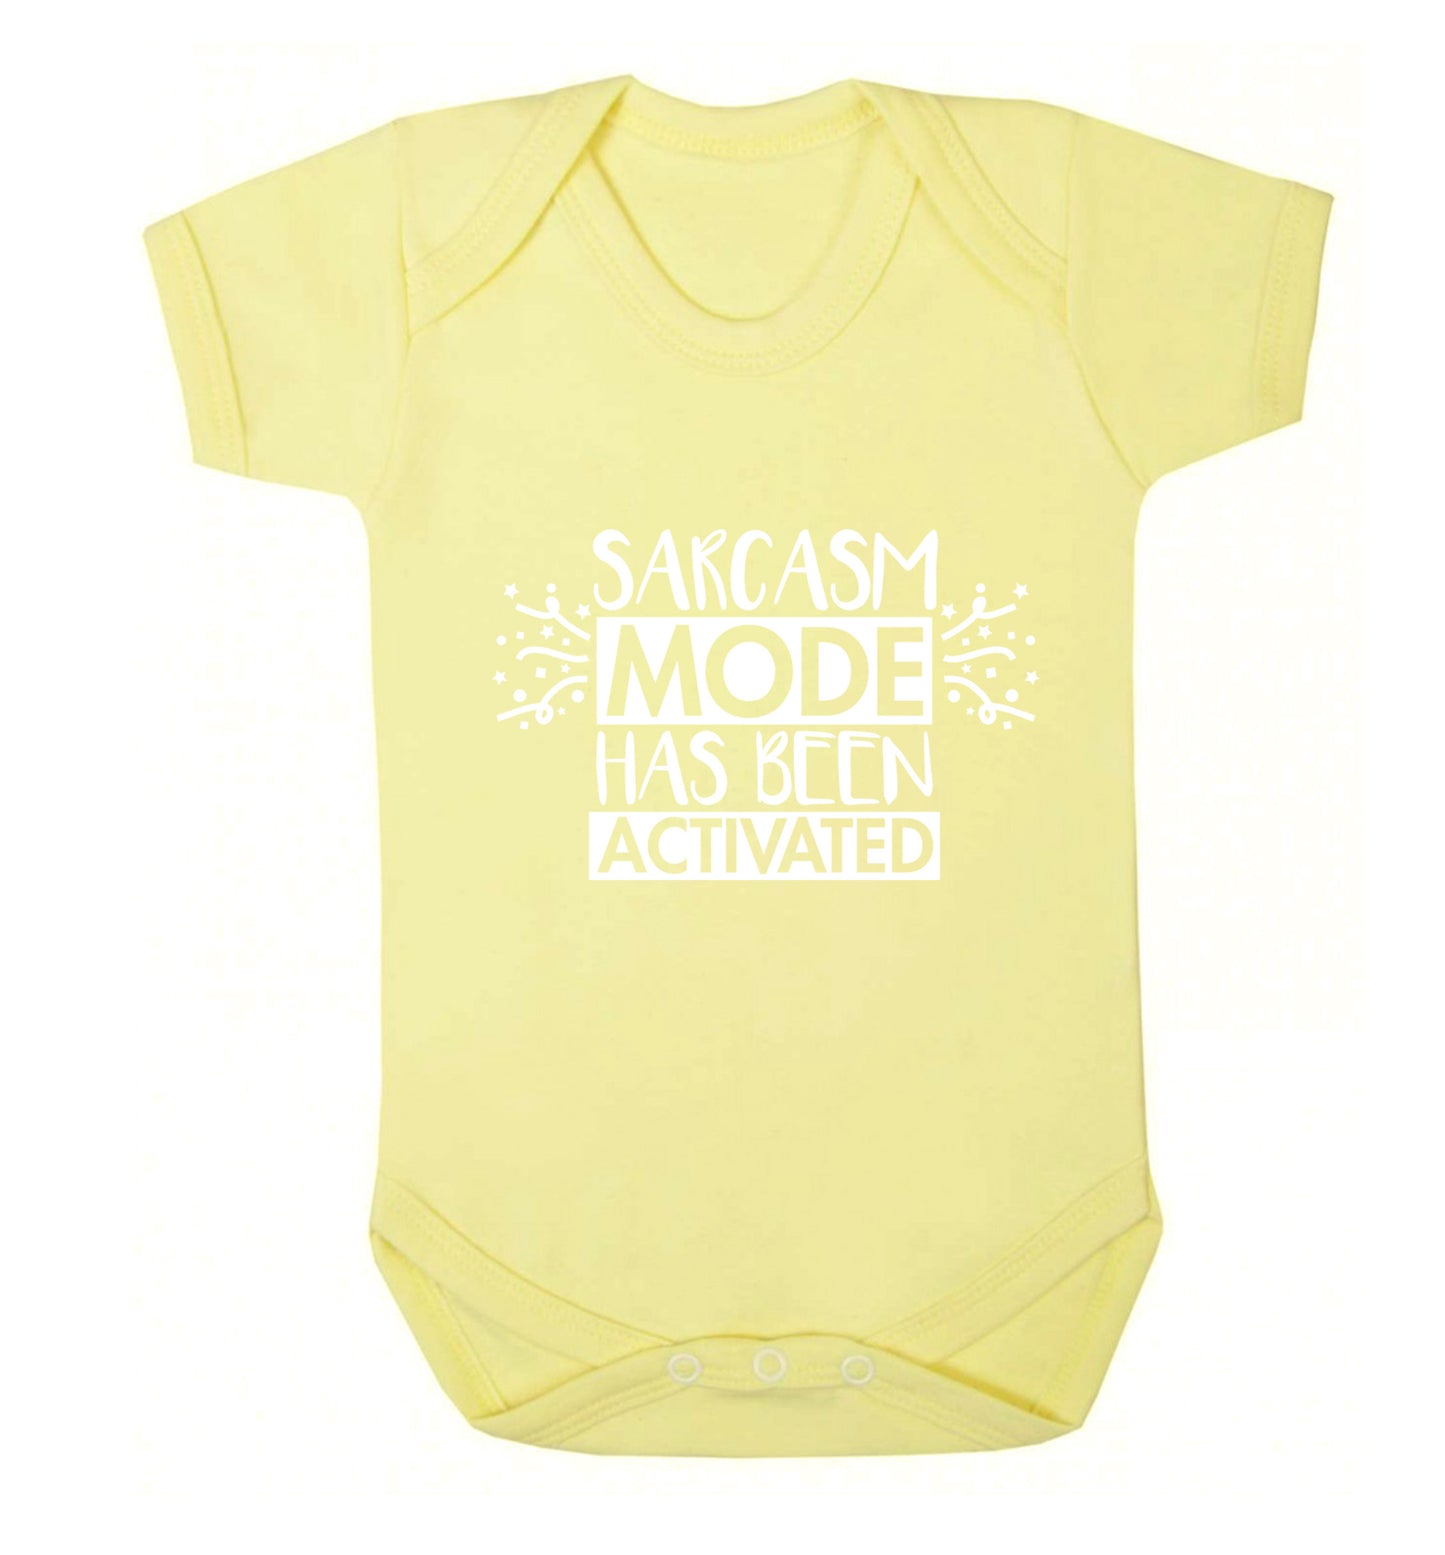 Sarcarsm mode has been activated Baby Vest pale yellow 18-24 months